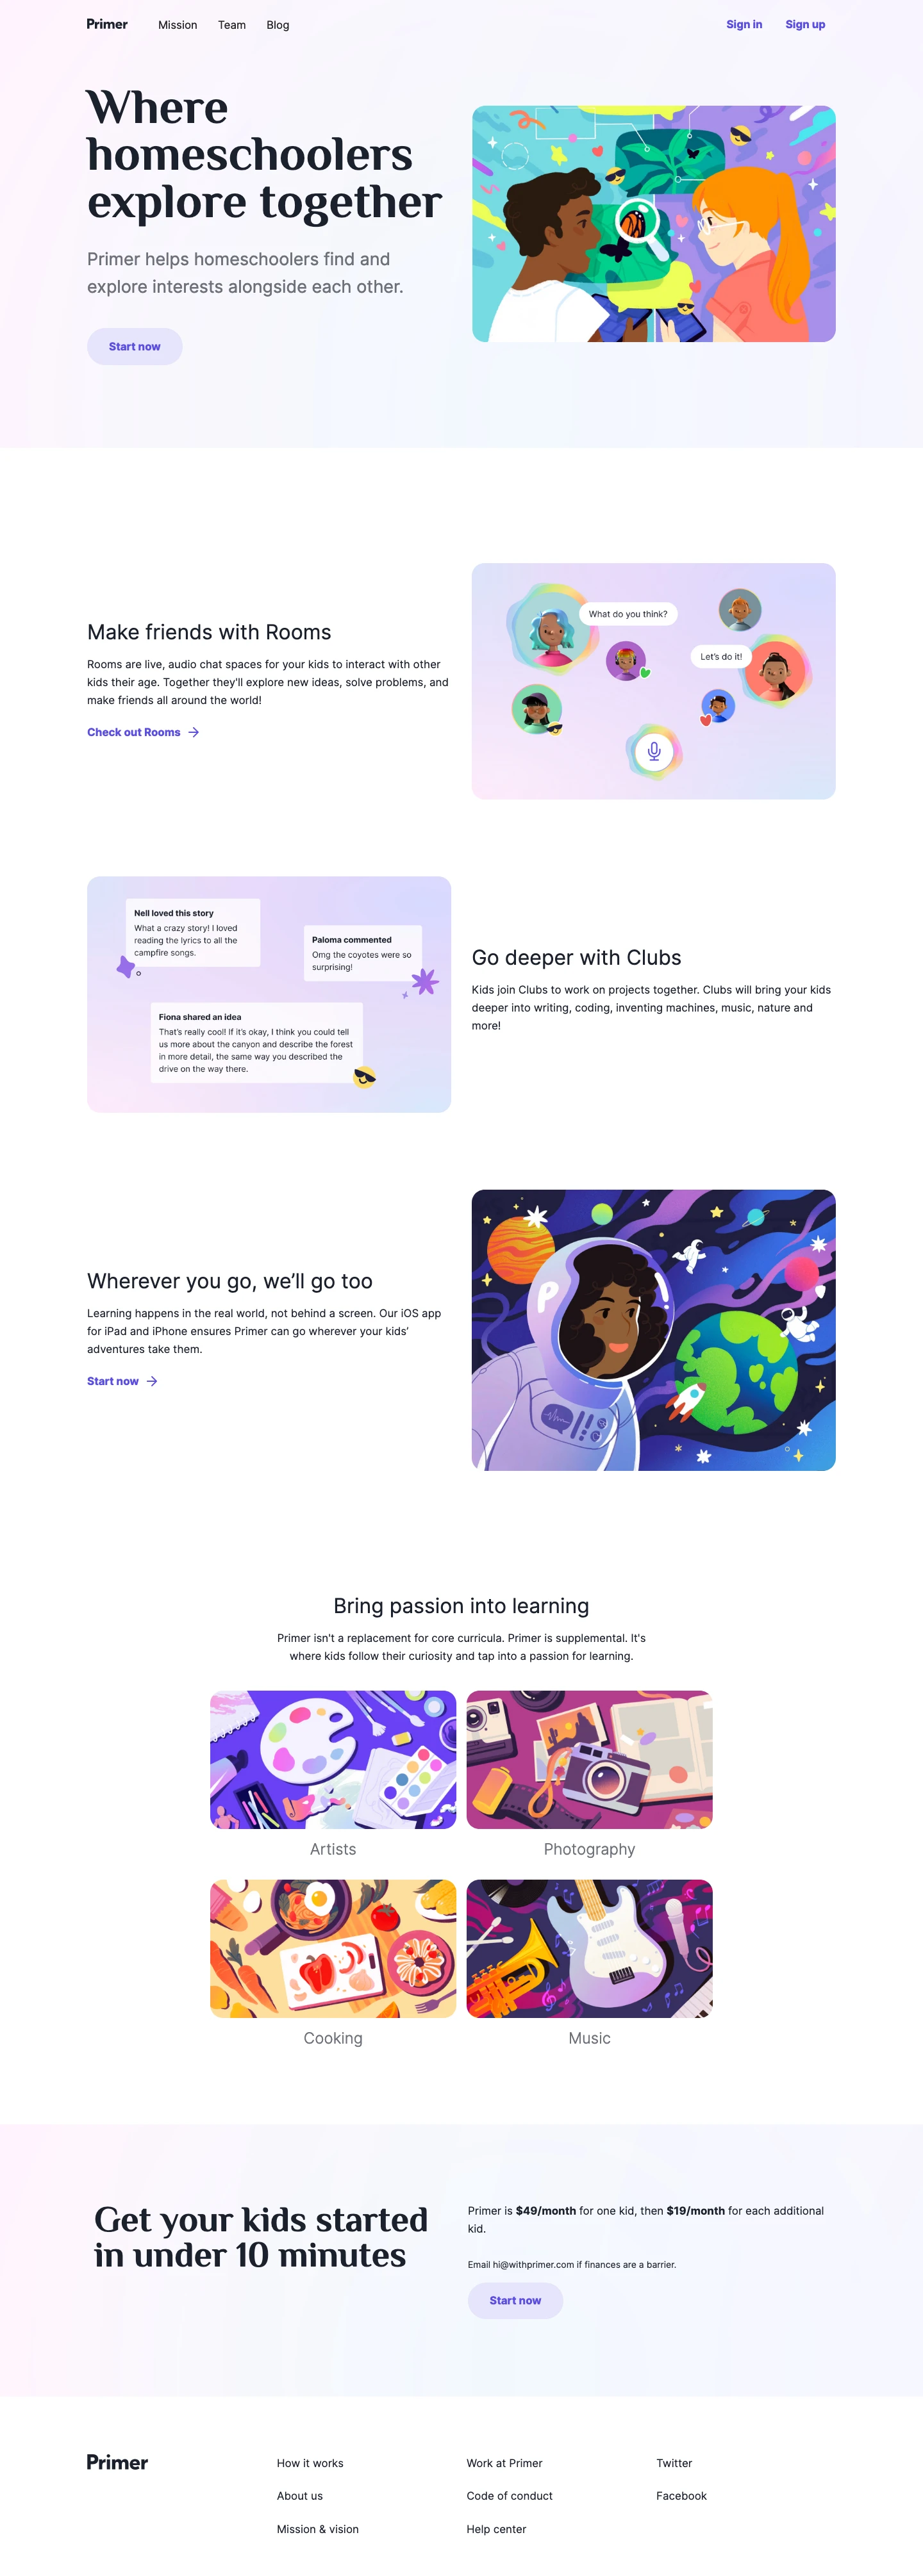 Primer Landing Page Example: Primer is where homeschoolers find and explore interests alongside each other. It's a space for your kids to follow their curiosity and tap into their passion for learning. All along they'll get to meet and interact with friends all over the world.